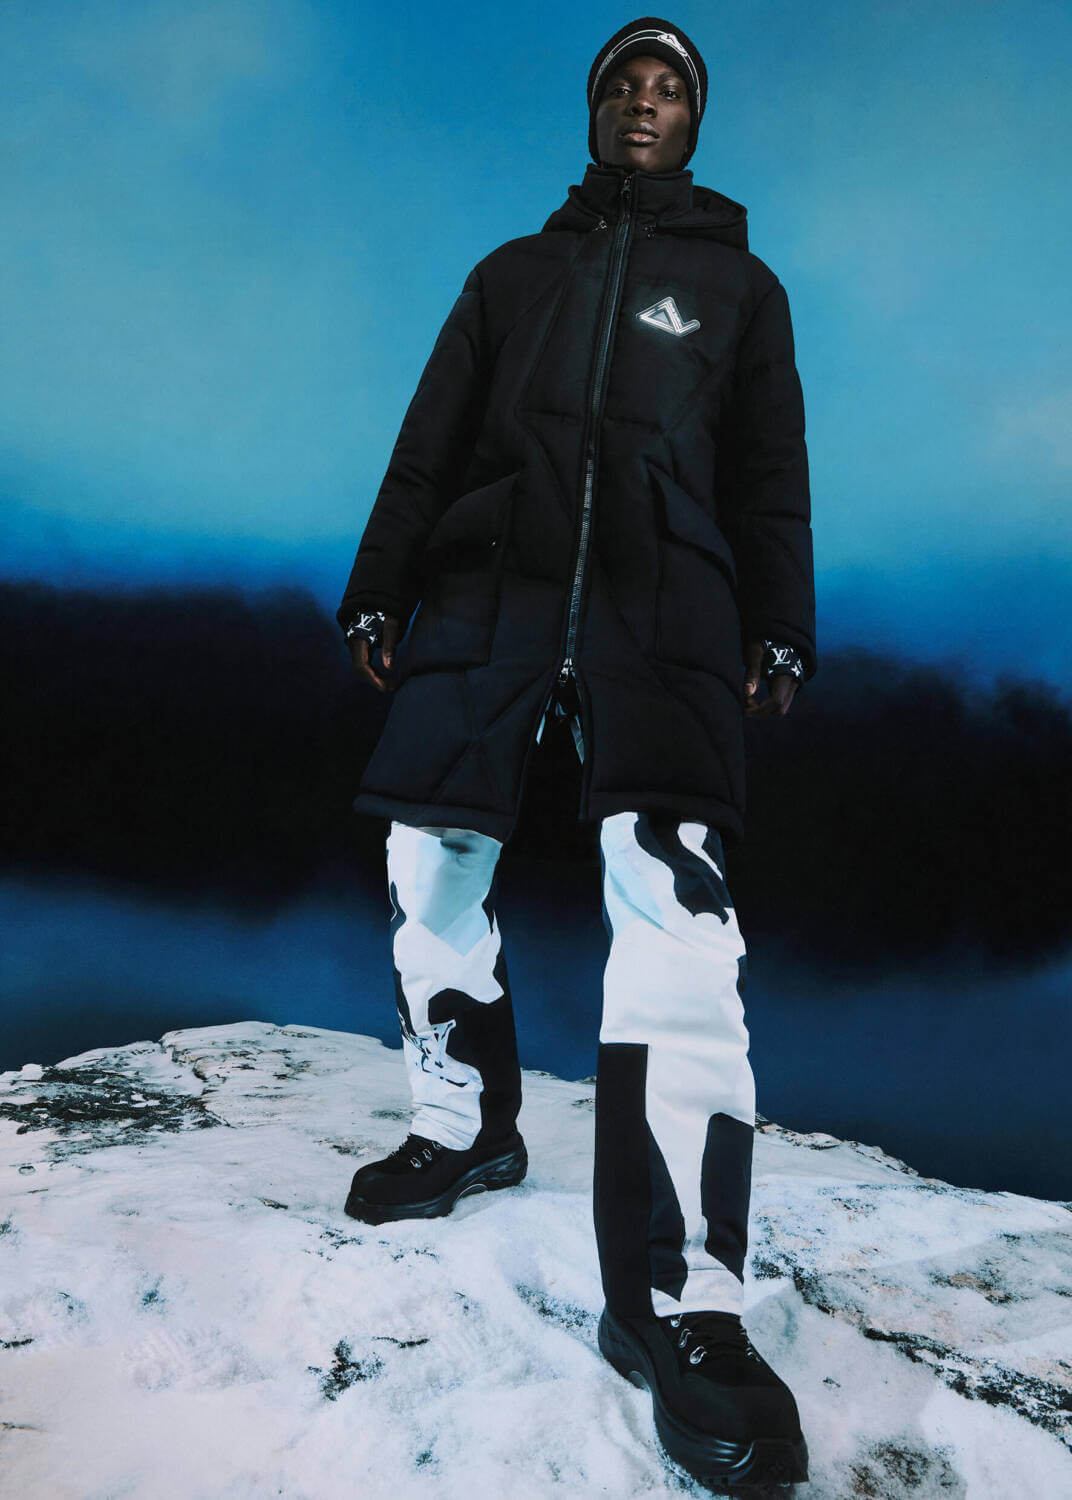 Louis Vuitton's latest ski capsule includes a snowboard and skis